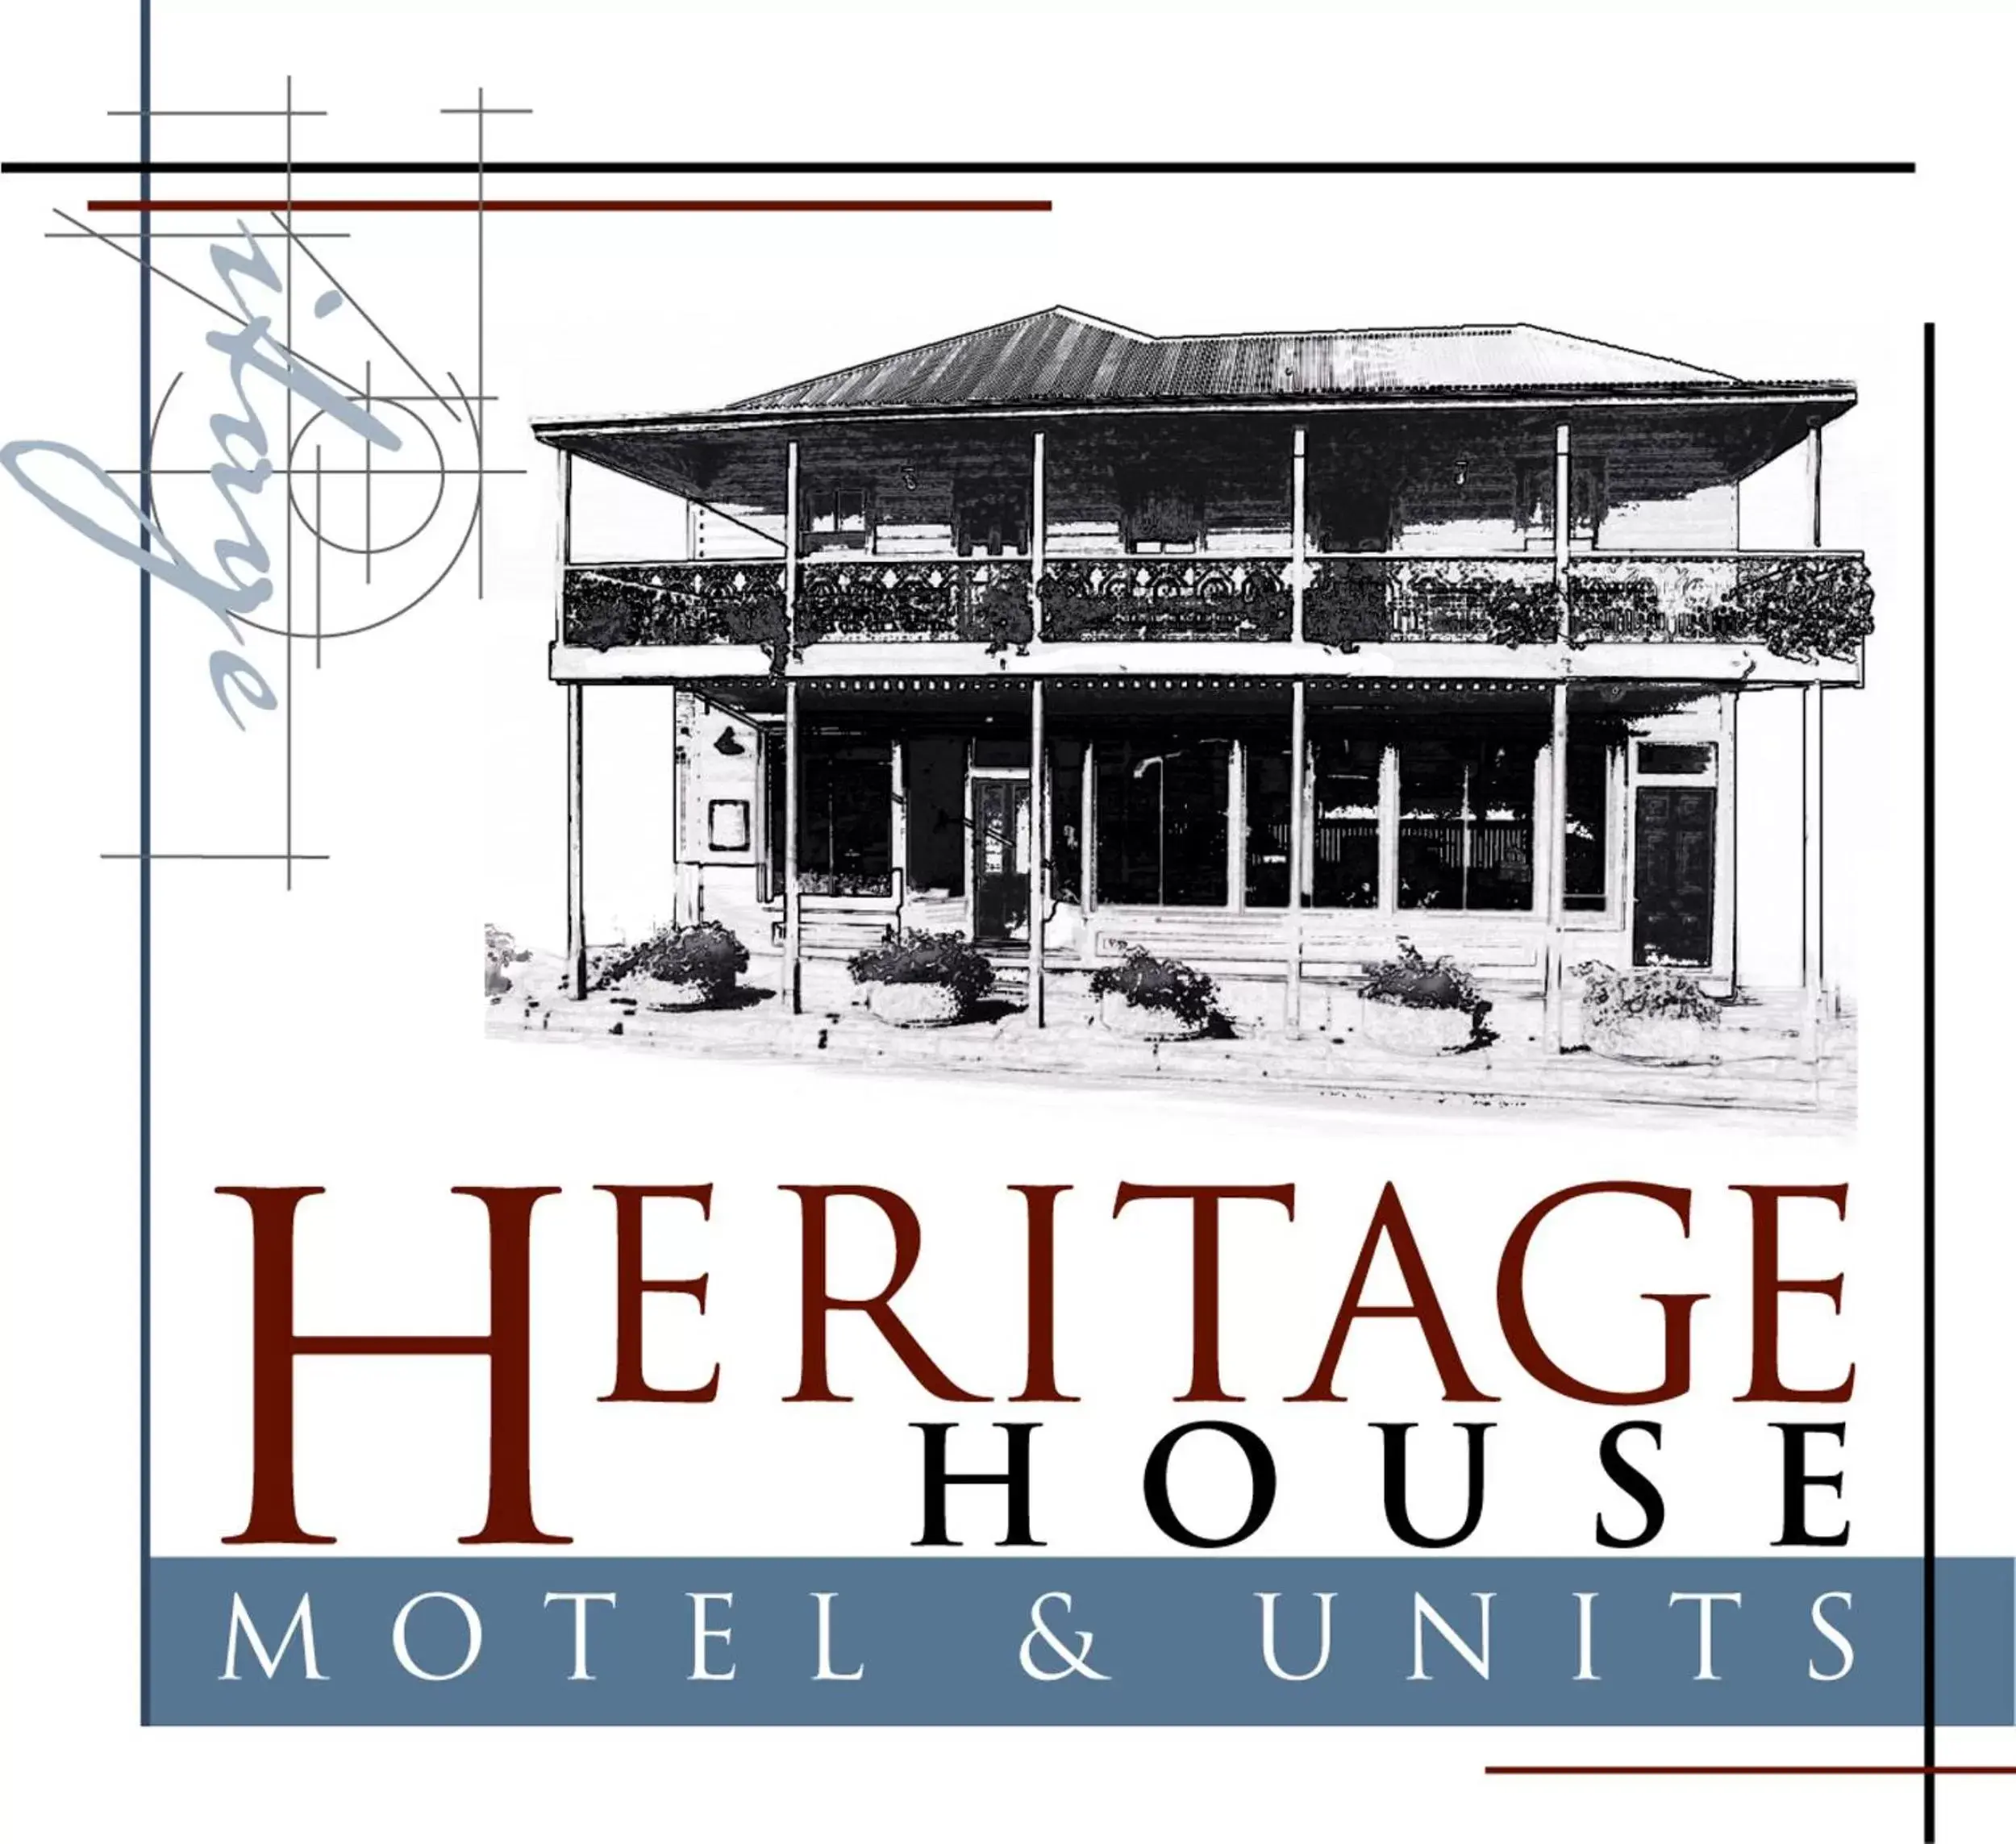 Property logo or sign, Property Building in Heritage House Motel & Units